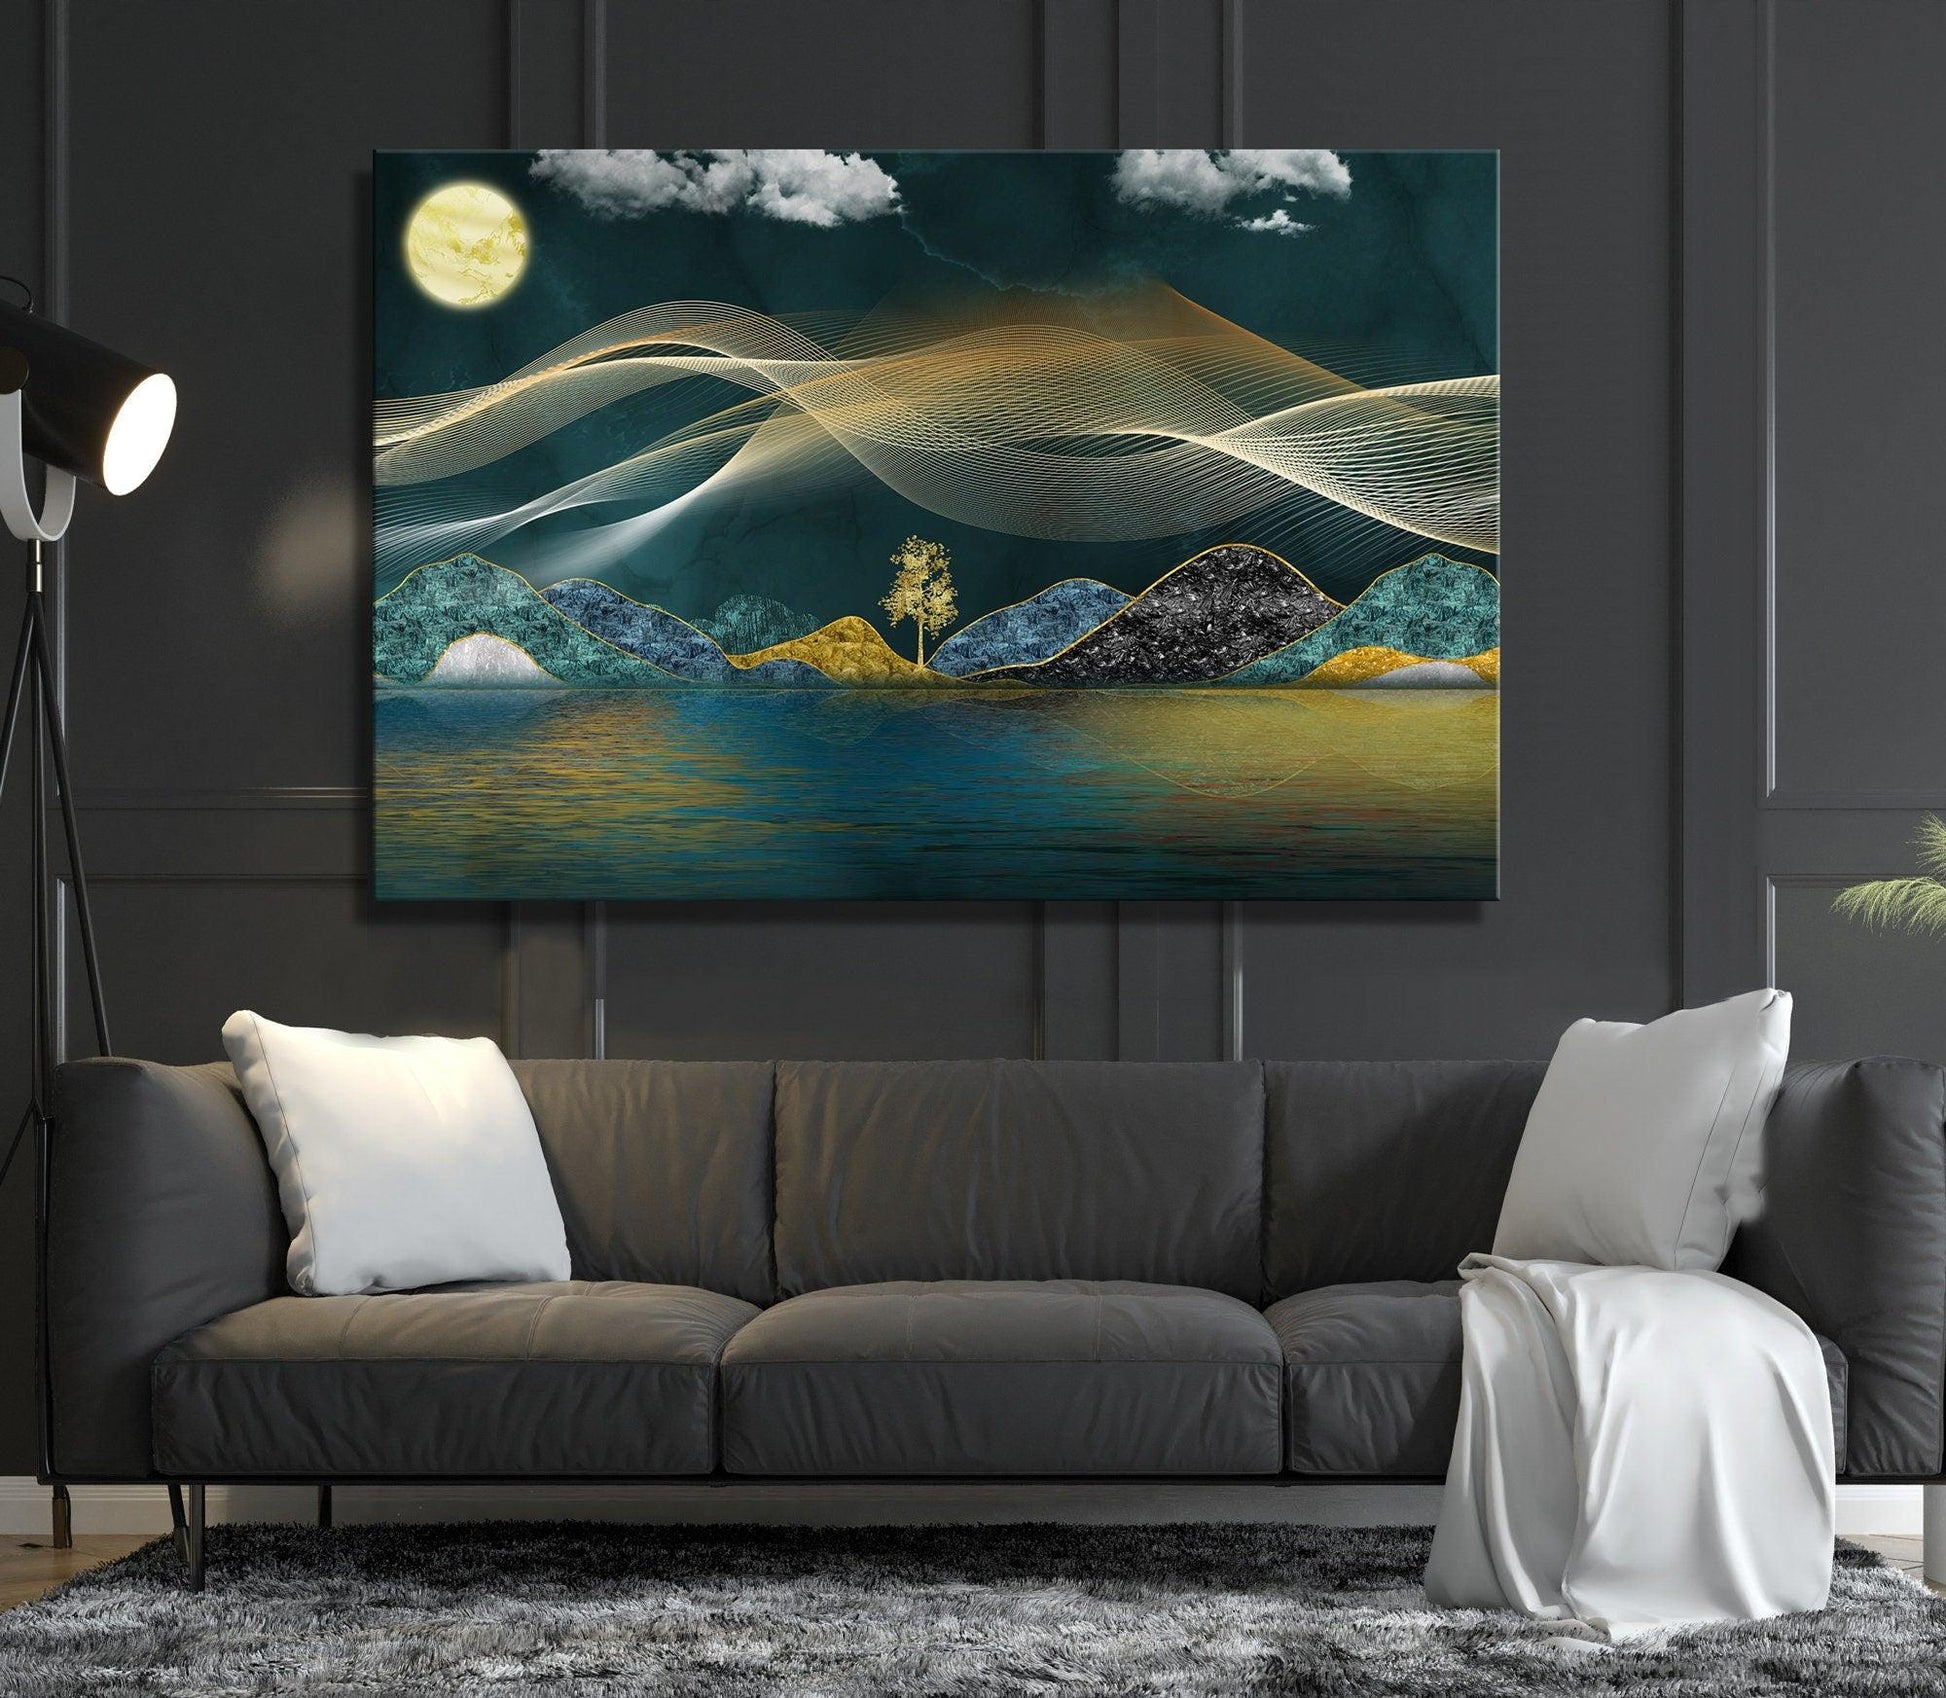 3 Piece sun and moon wall art|  sun and moon wall art, Modern Home Artwork, Sunrise Landscapes canvas wall art, Abstract Painting, Moon Sign